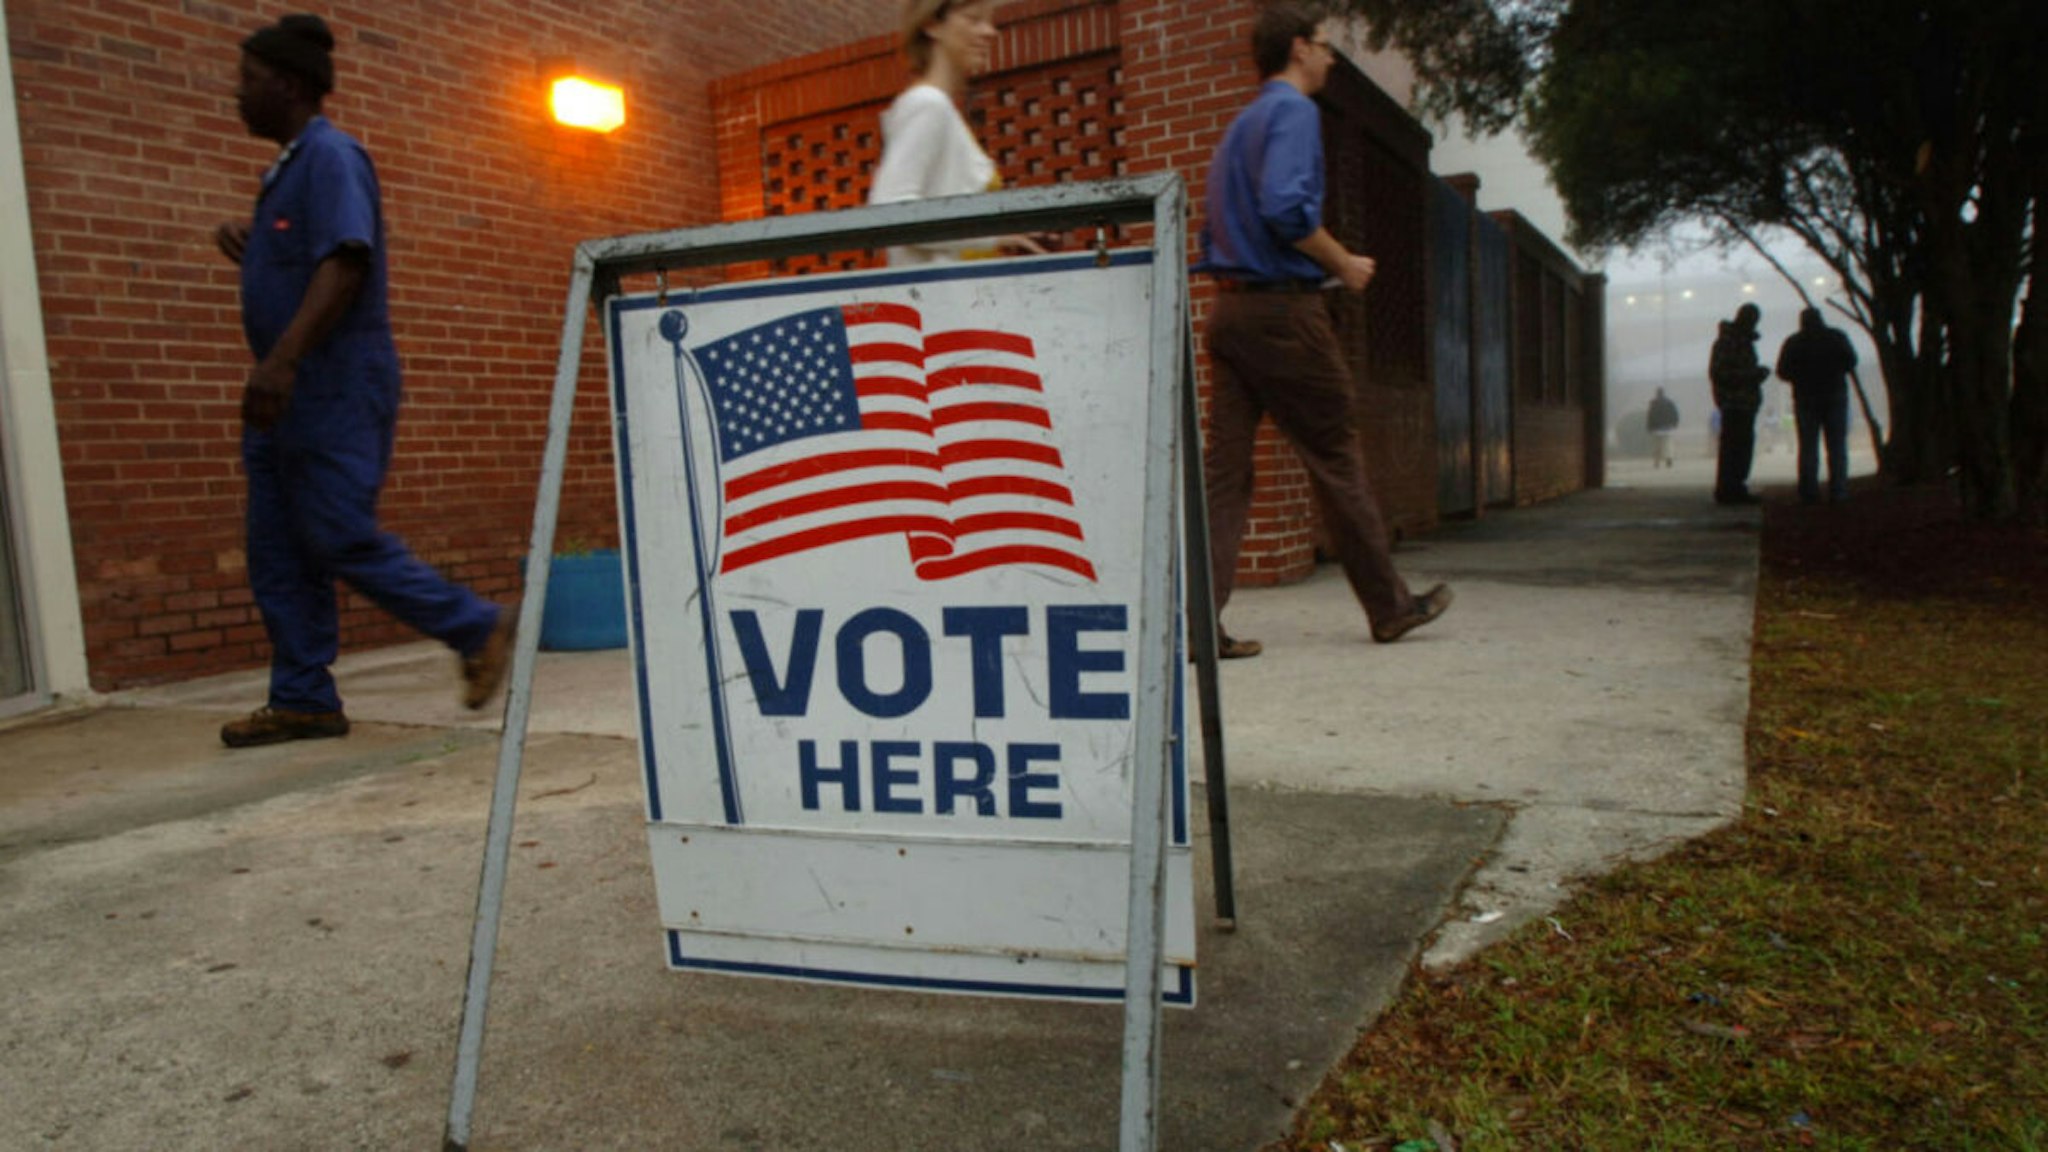 Voters leave a precinct after casting their ballots during Georgia's primary Super Tuesday's presidential election January 5, 2008 in Savannah, Georgia.